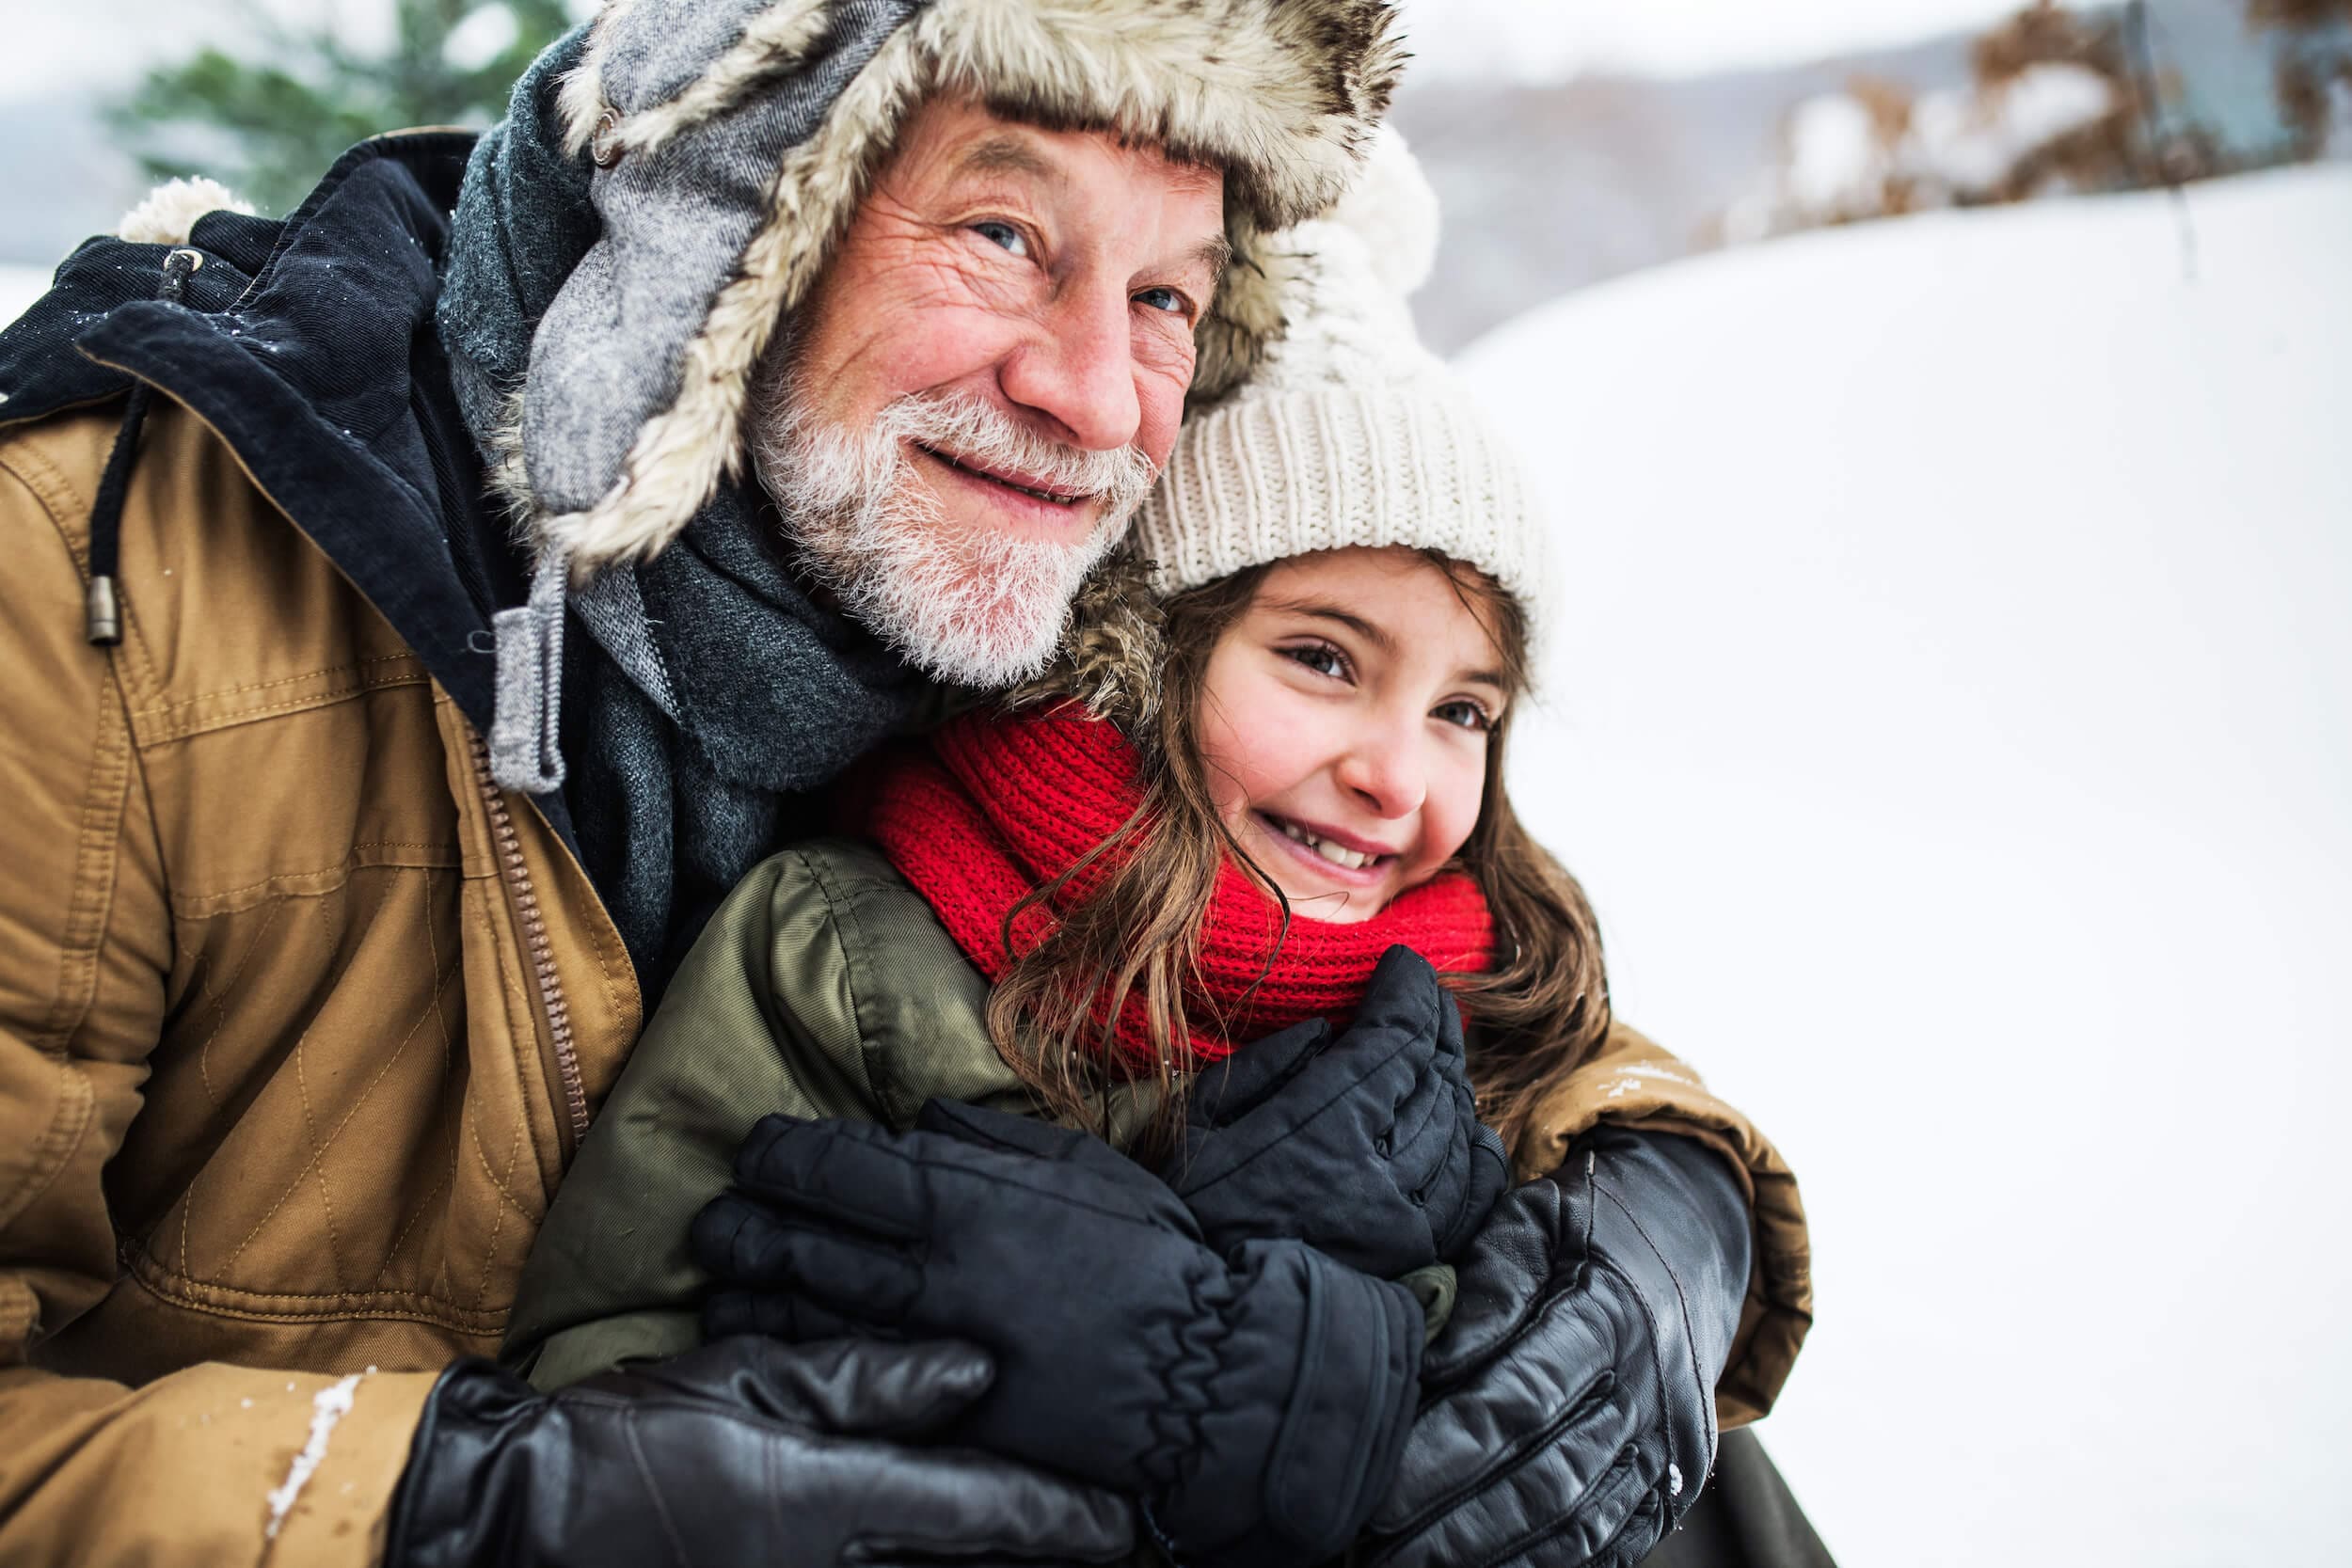 Older man with young girl in the snow